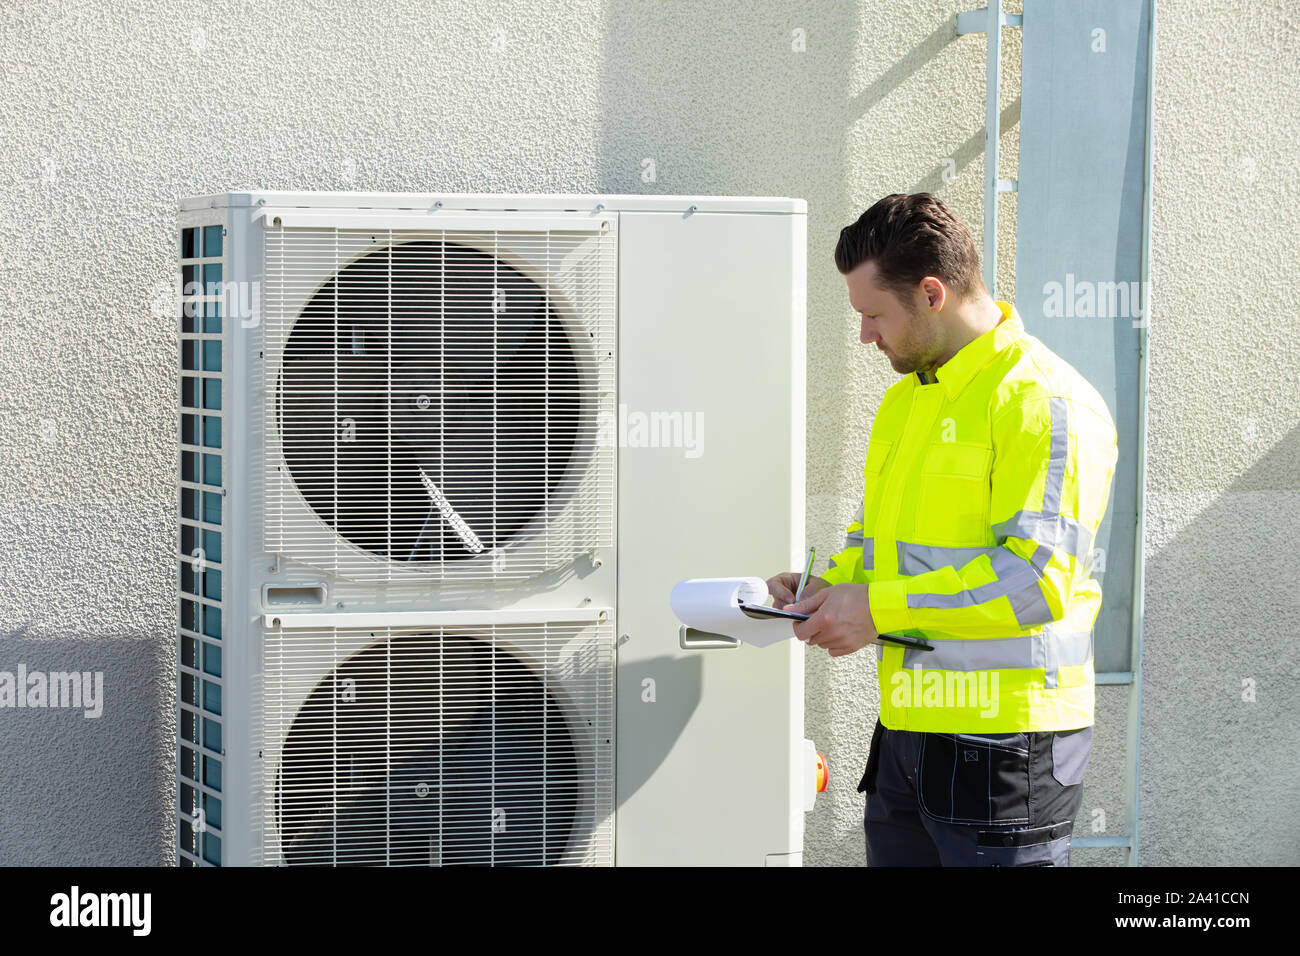 Young Male Technician Wearing Safety Jacket Looking At Air Conditioner Unit Making Notes Stock Photo